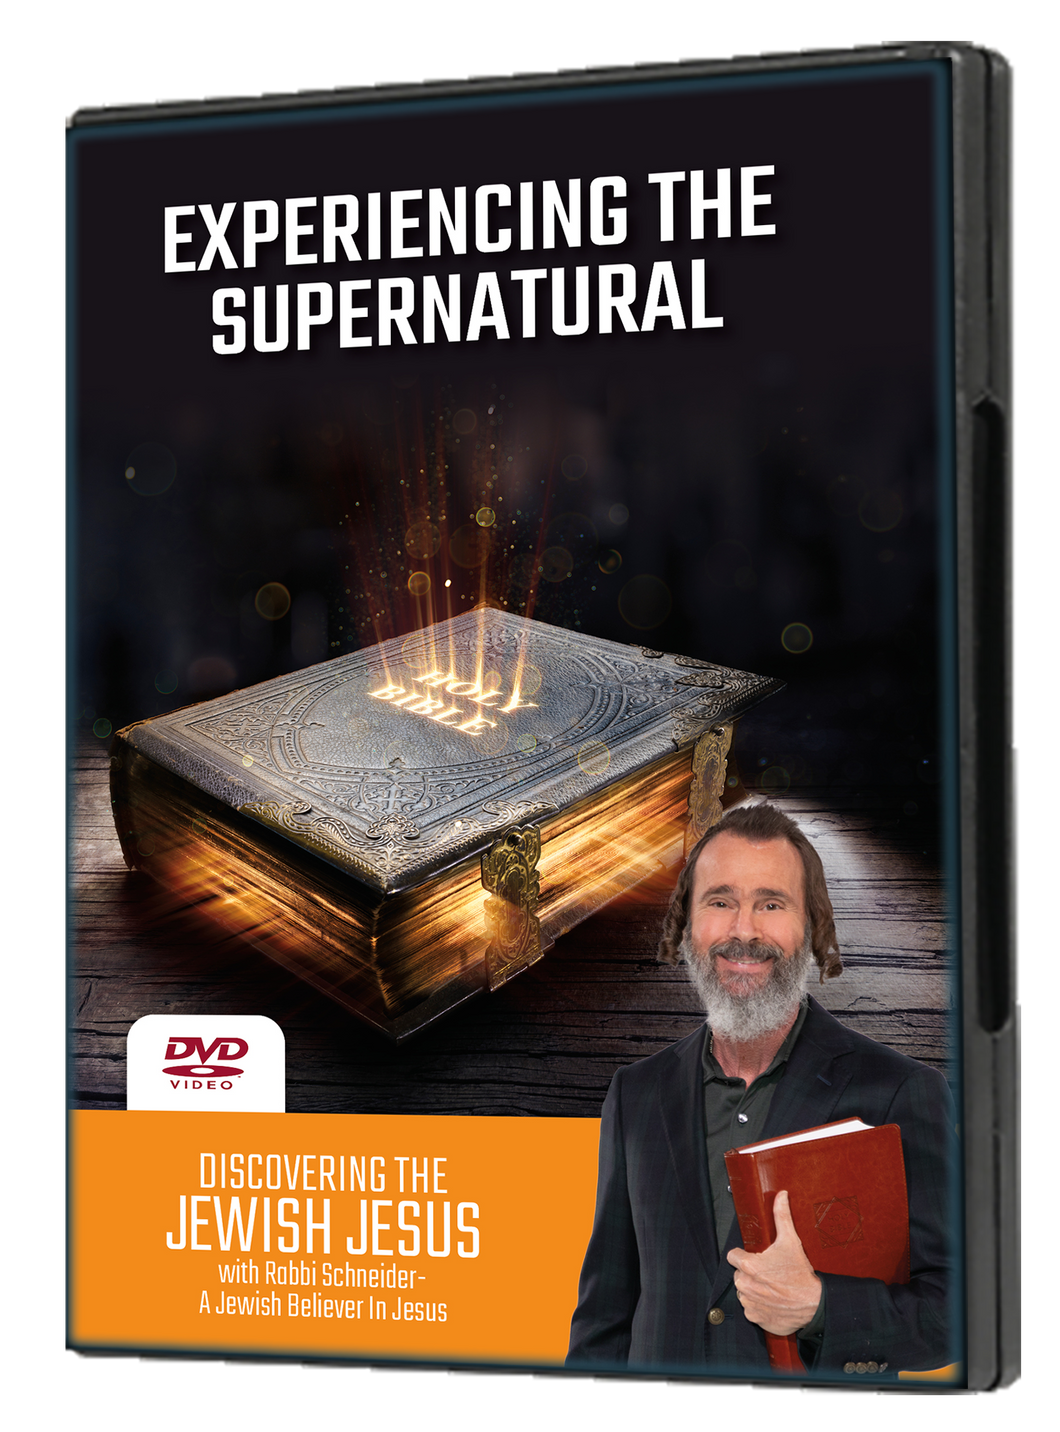 Experiencing the Supernatural